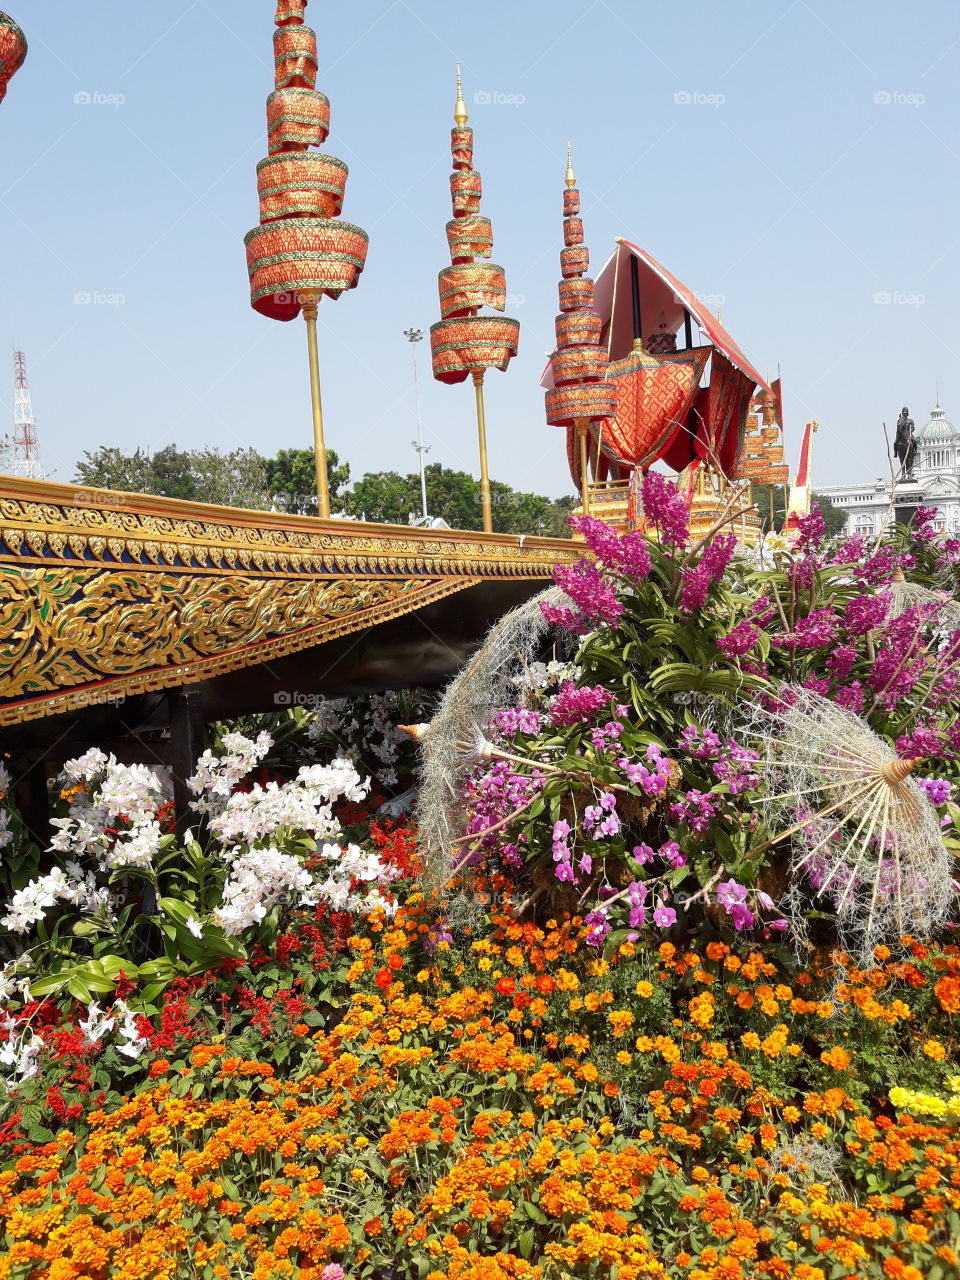 the beauty of flower decoration beside tha"Suphannahong Royal Barge Model" , beautiful carving , many tiered umbrella and special pavillion.